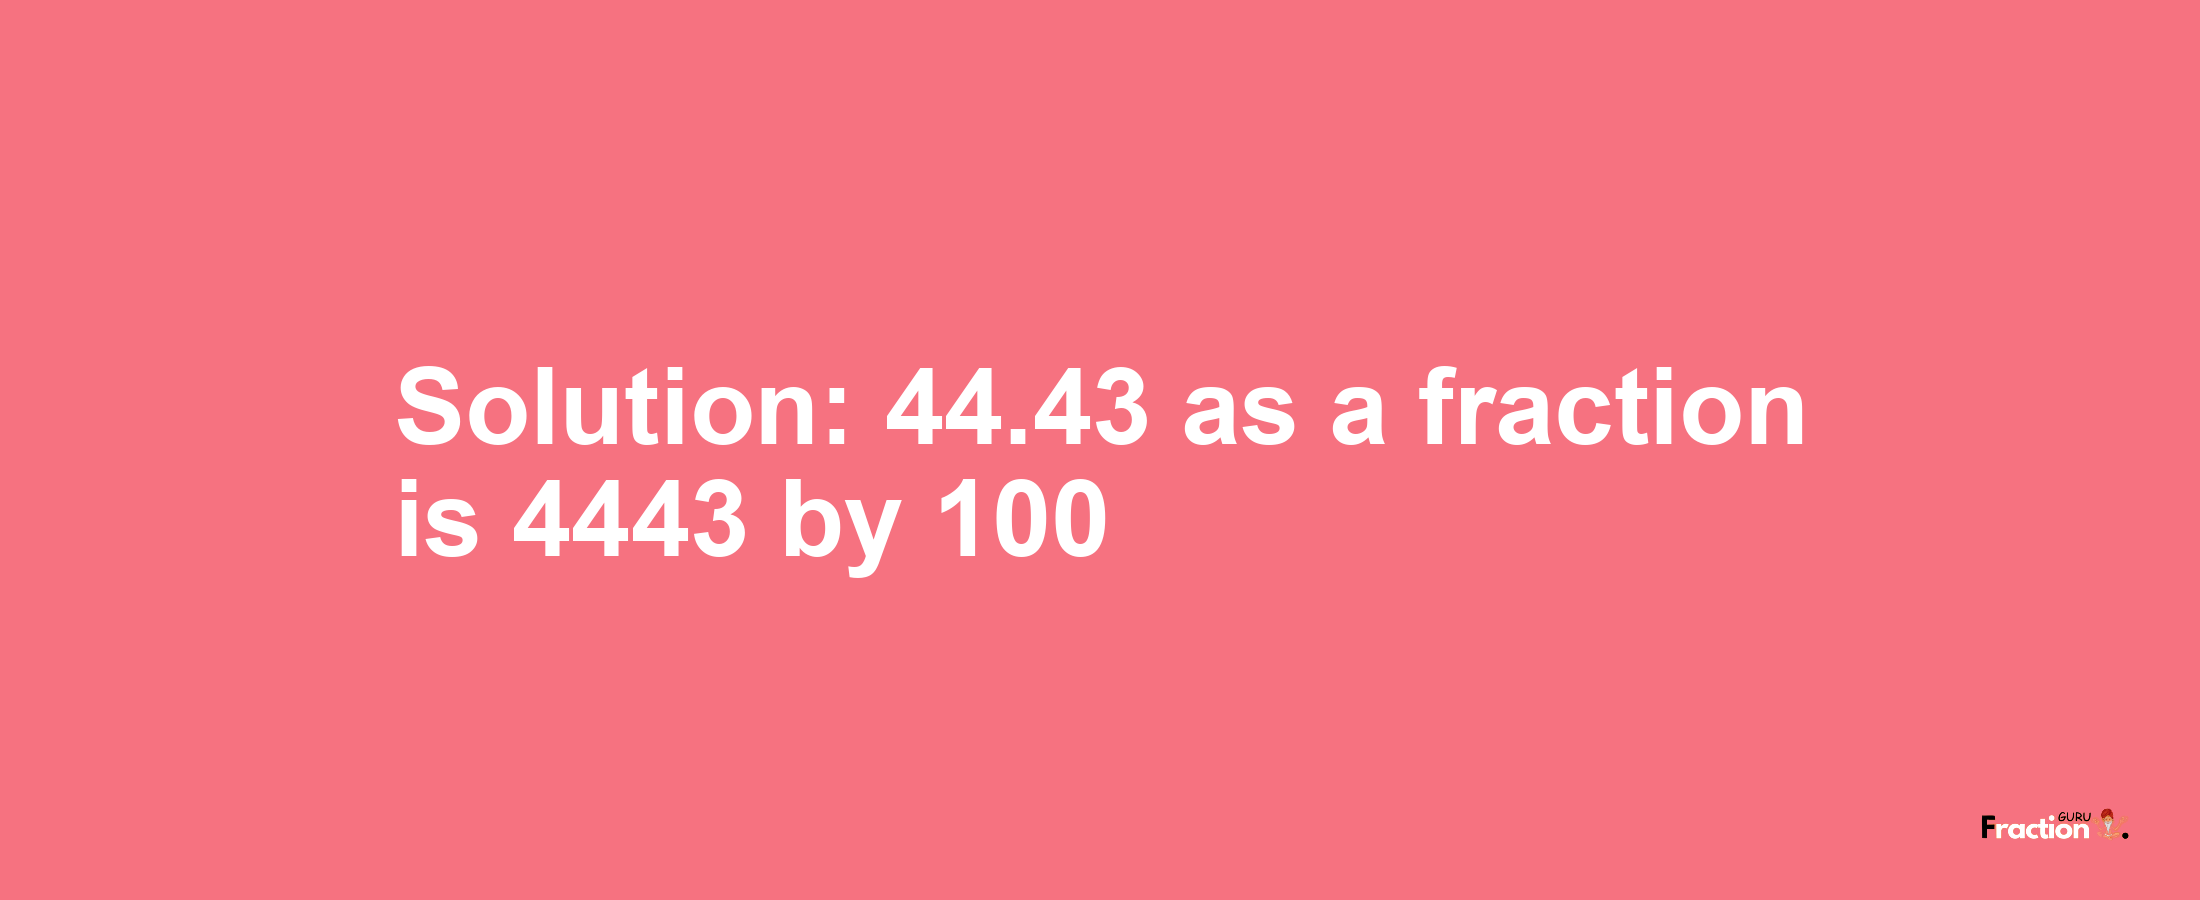 Solution:44.43 as a fraction is 4443/100